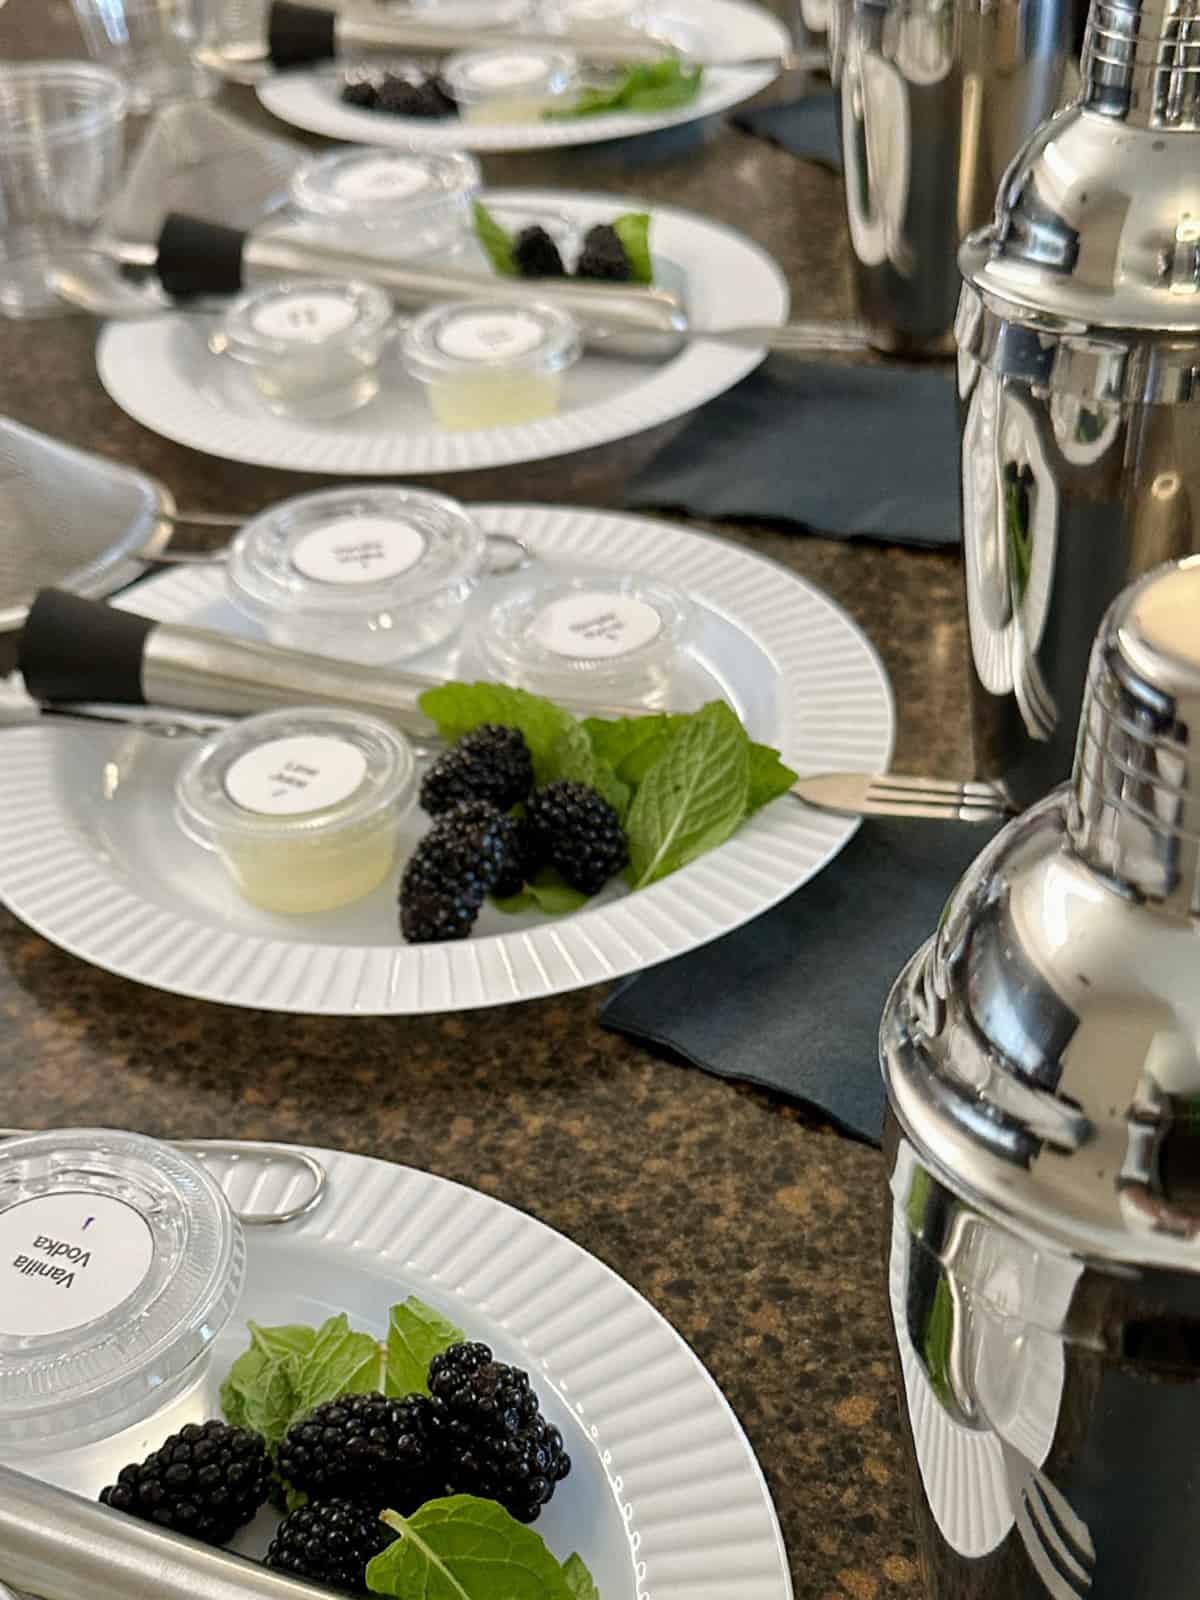 Set up for cocktail classes.